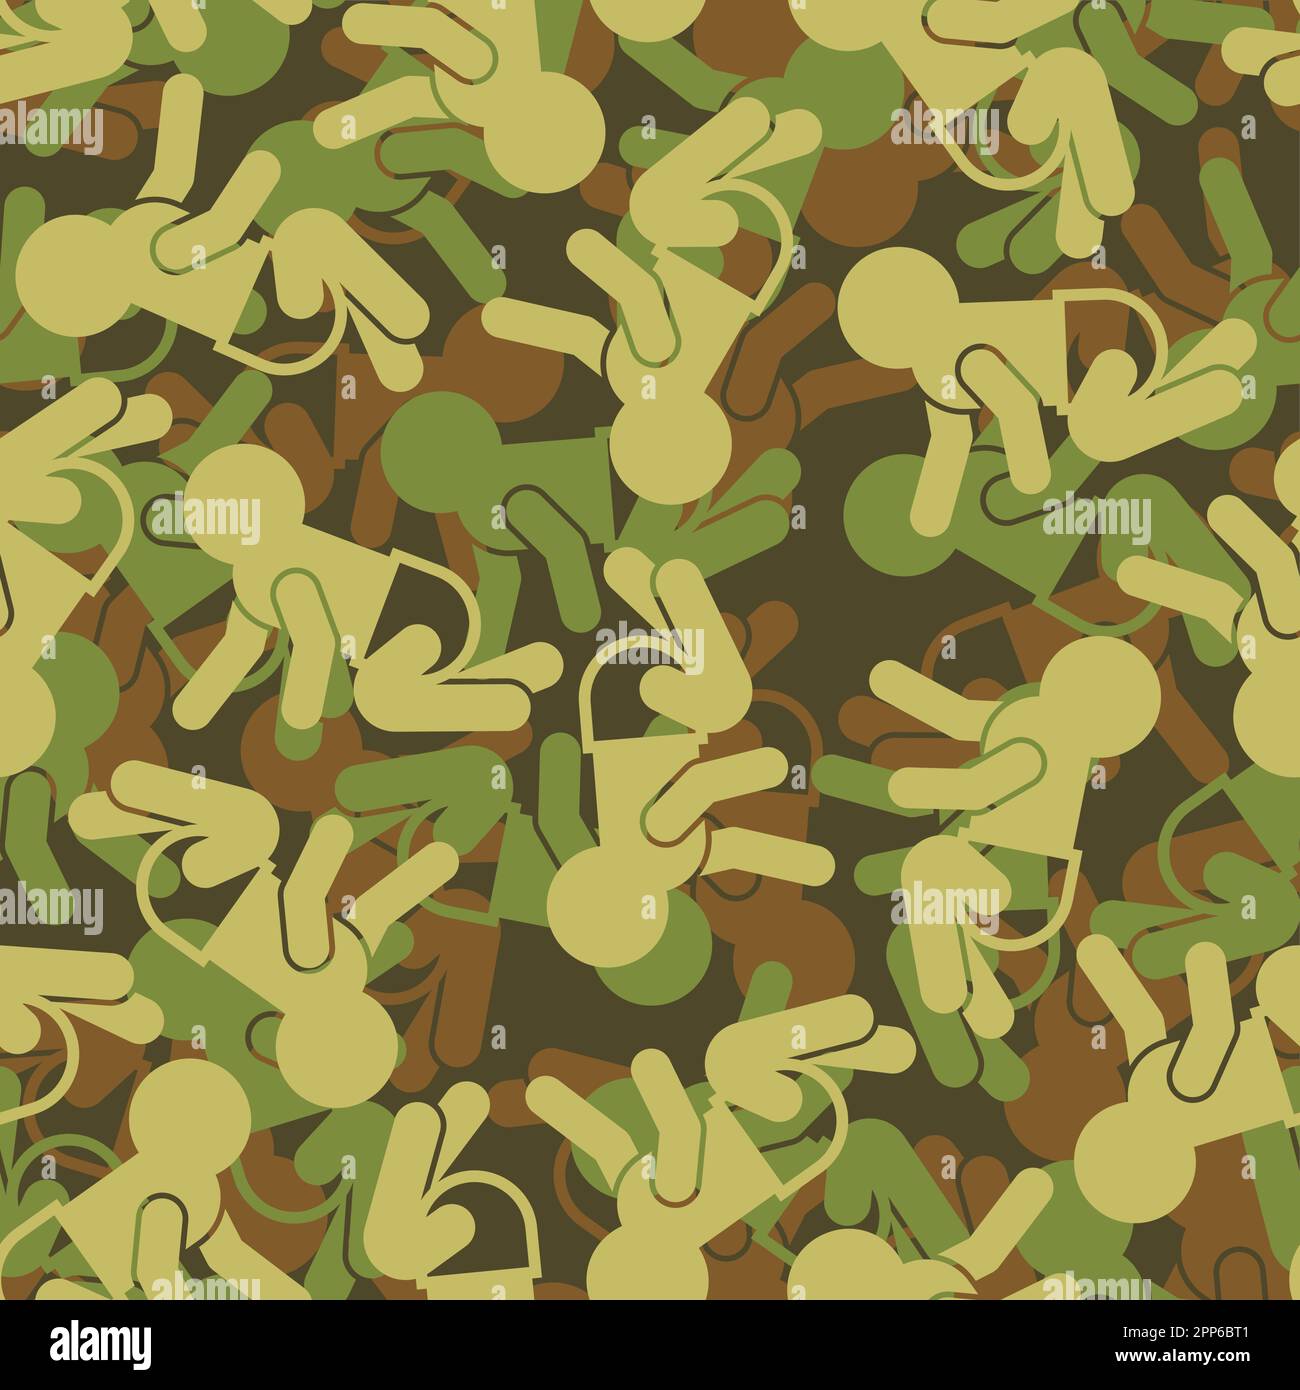 Baby Army pattern seamless. infant Militar ybackground. Soldier's protective texture Stock Vector